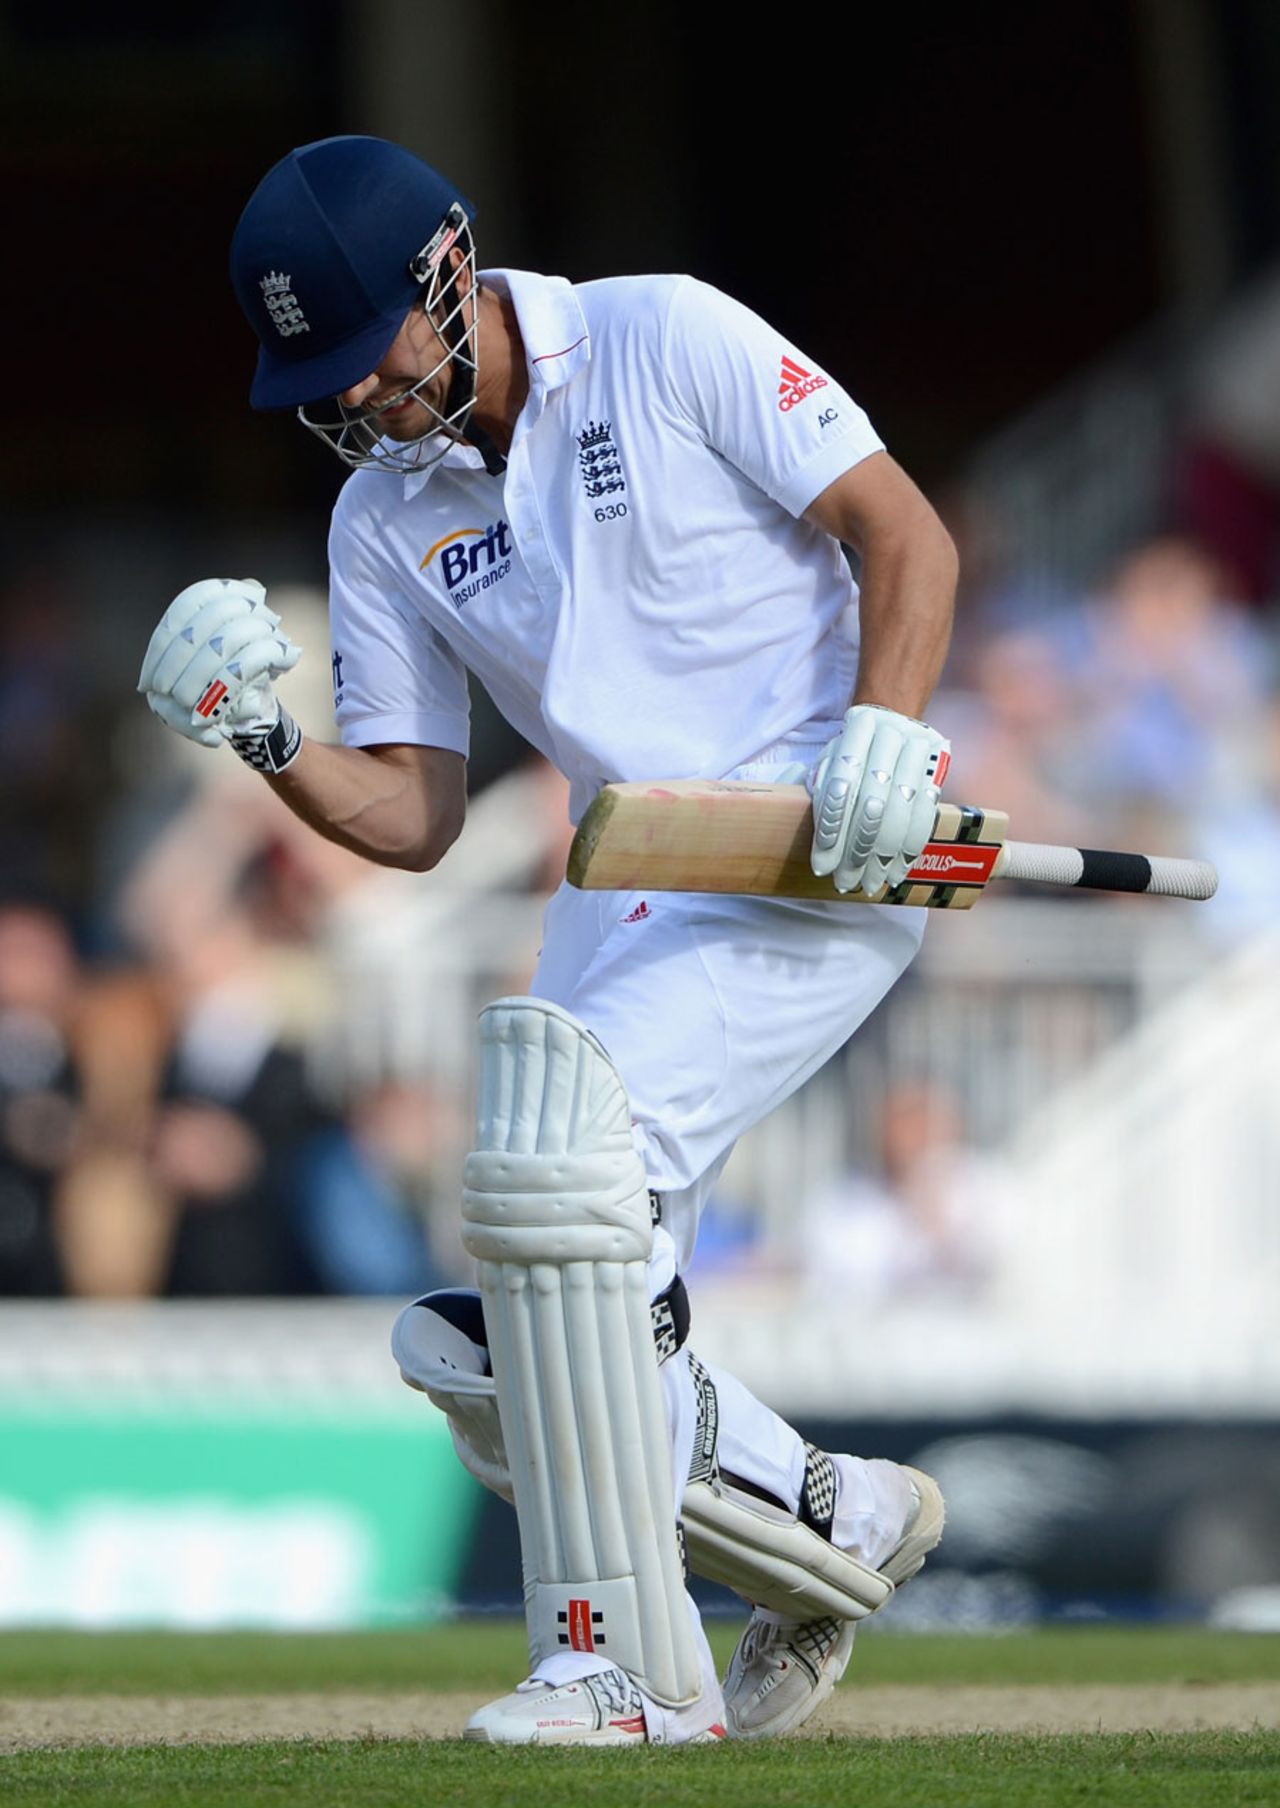 Alastair Cook celebrates his 20th Test match hundred, England v South Africa, 1st Investec Test, The Oval, 1st day, July 19, 2012